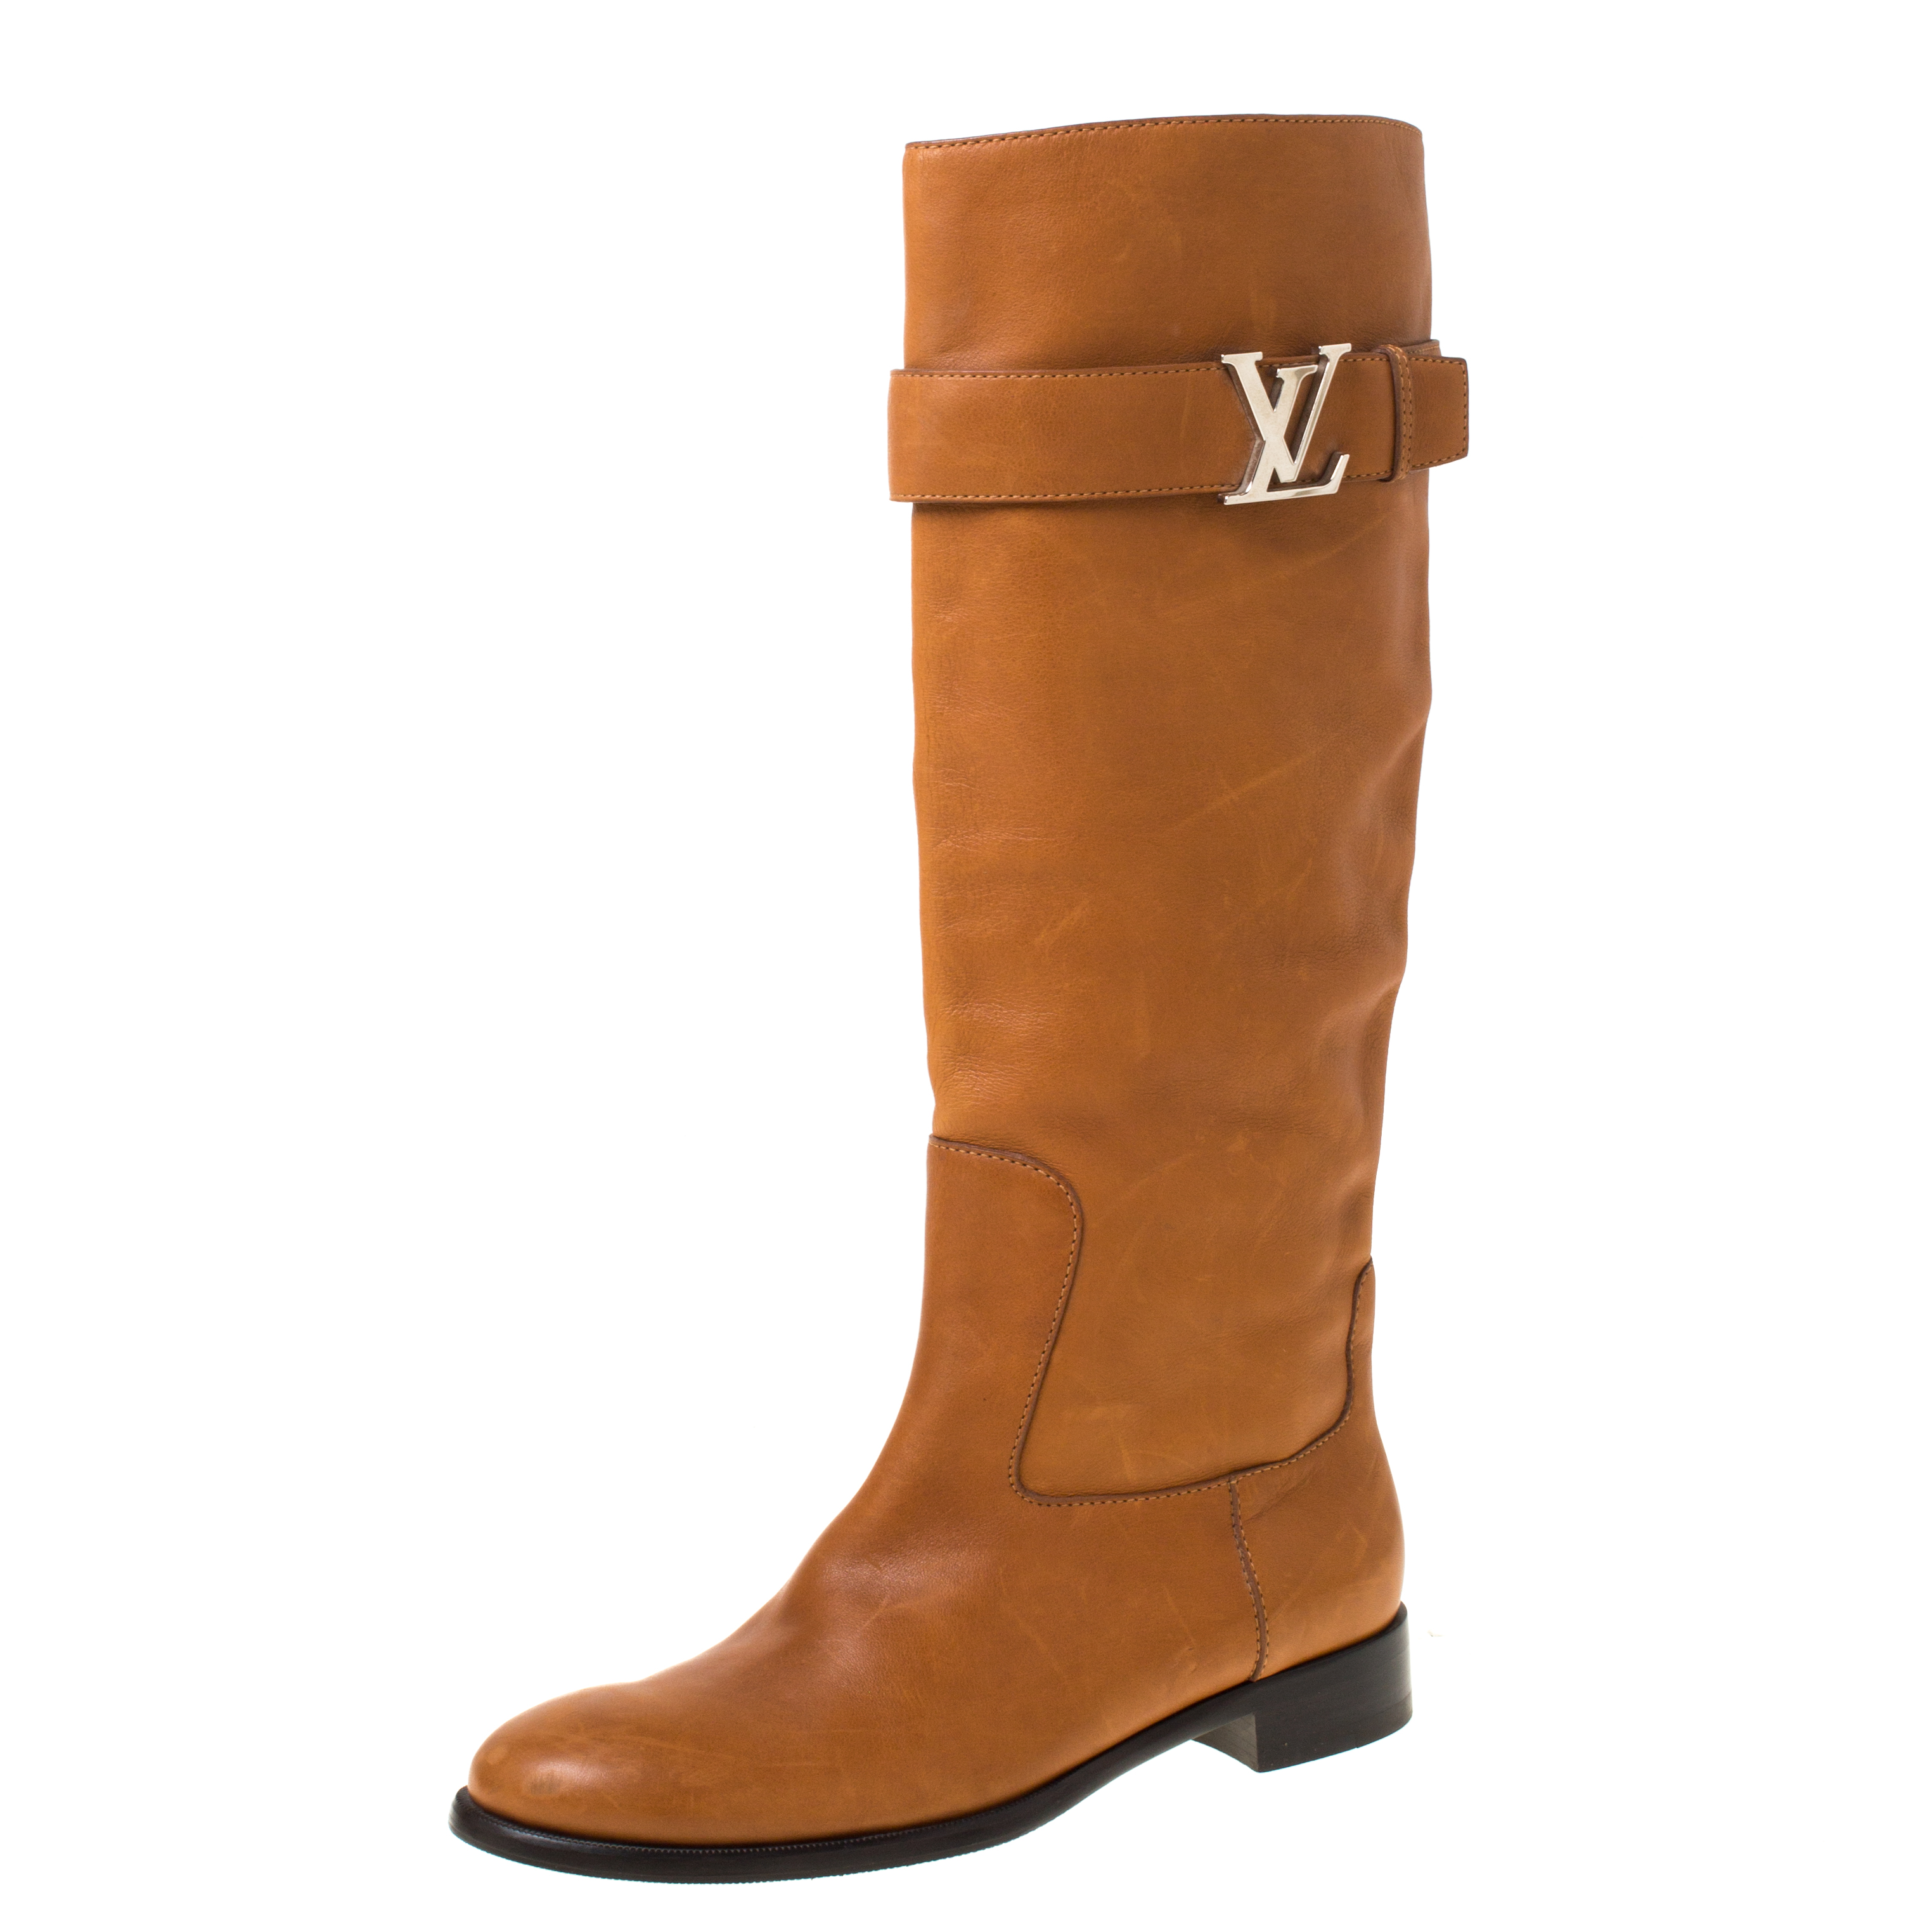 lv riding boots